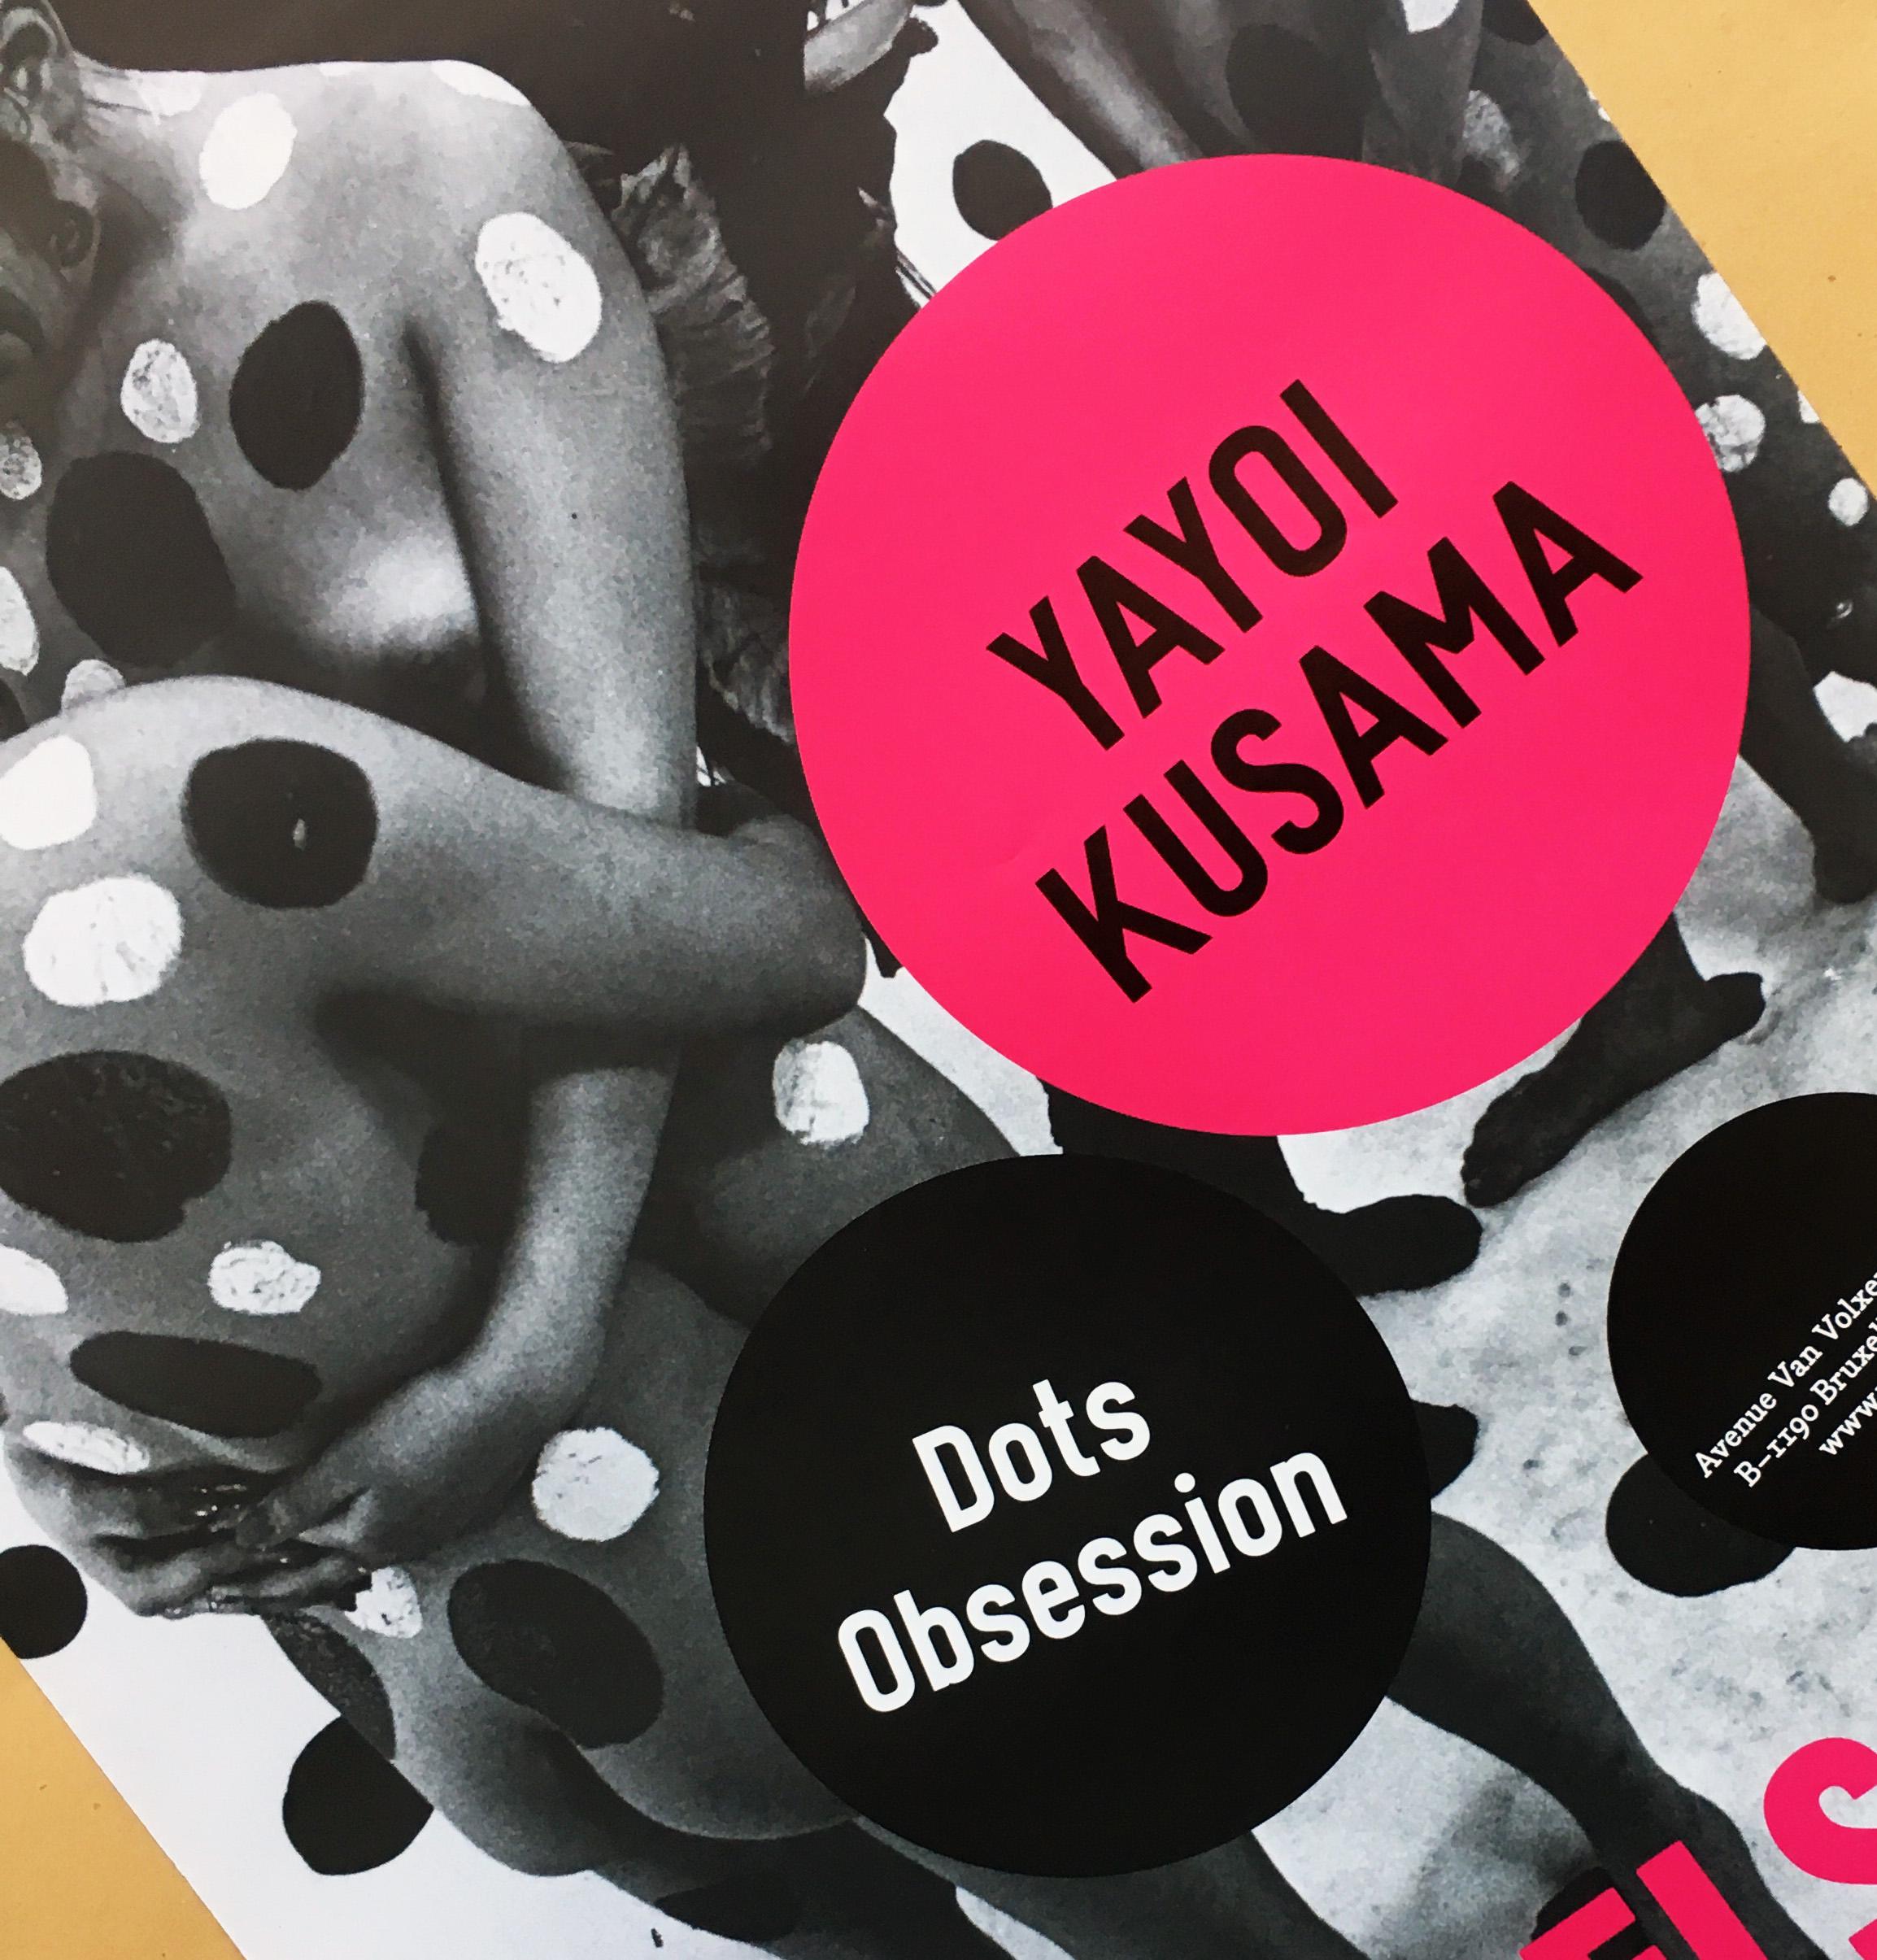 Yayoi Kusama Dots Obsession 2007
An iconic, vibrantly colored pop art piece - this Kusama exhibit poster features the universal polka dot patterns for which the artist is best known; here set amidst a photograph of Kusama painting human figures in